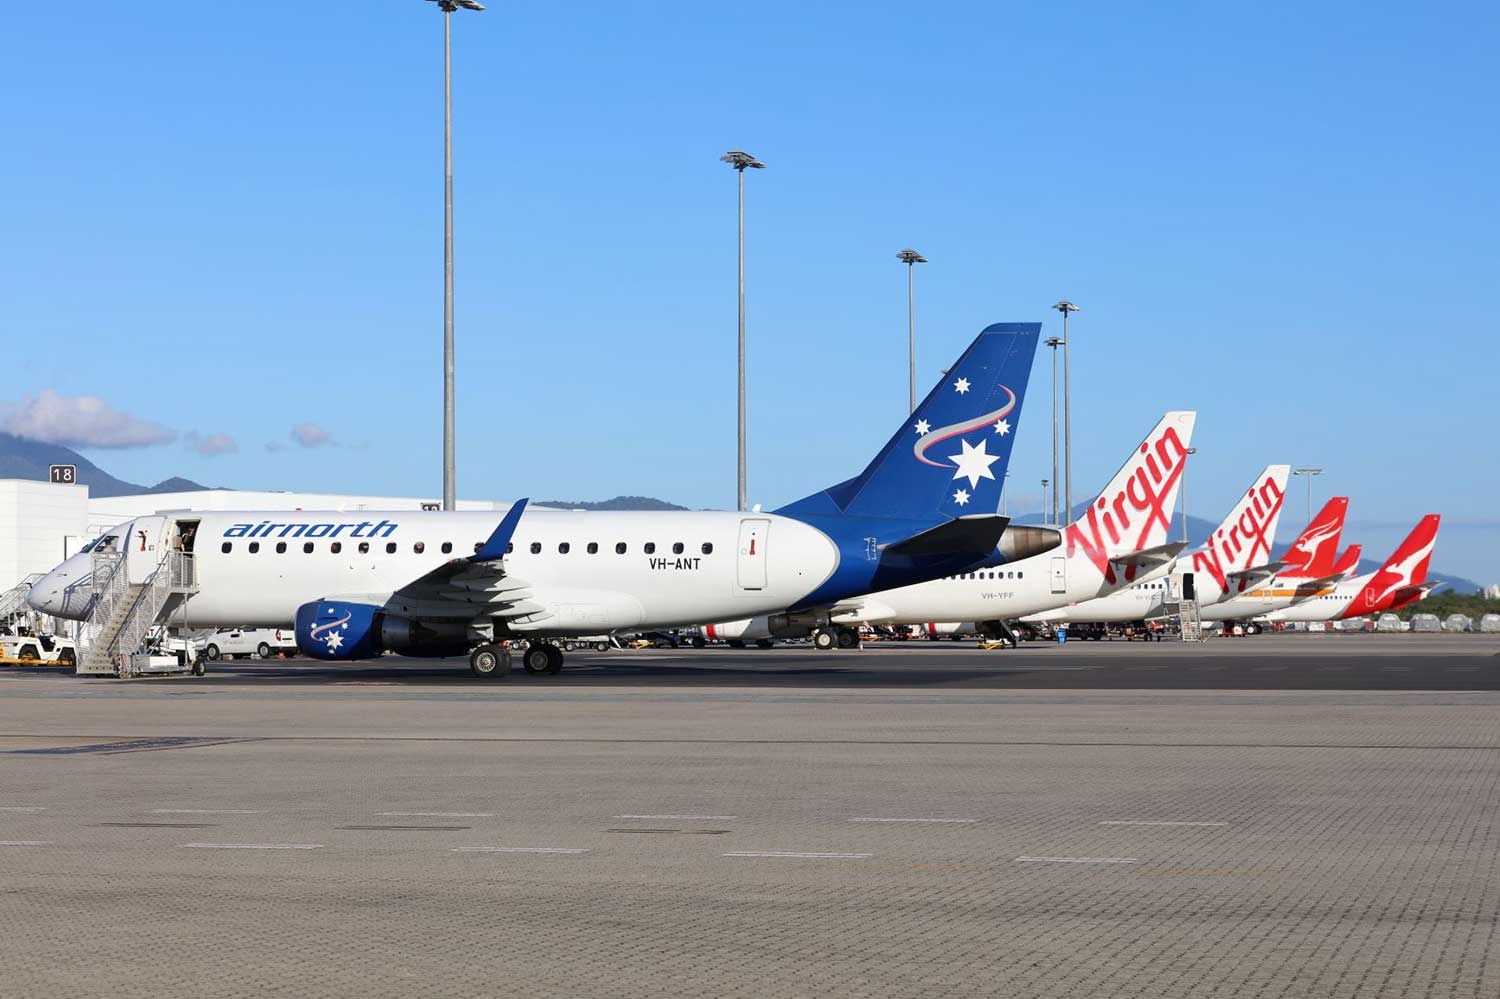 cairns airport planes